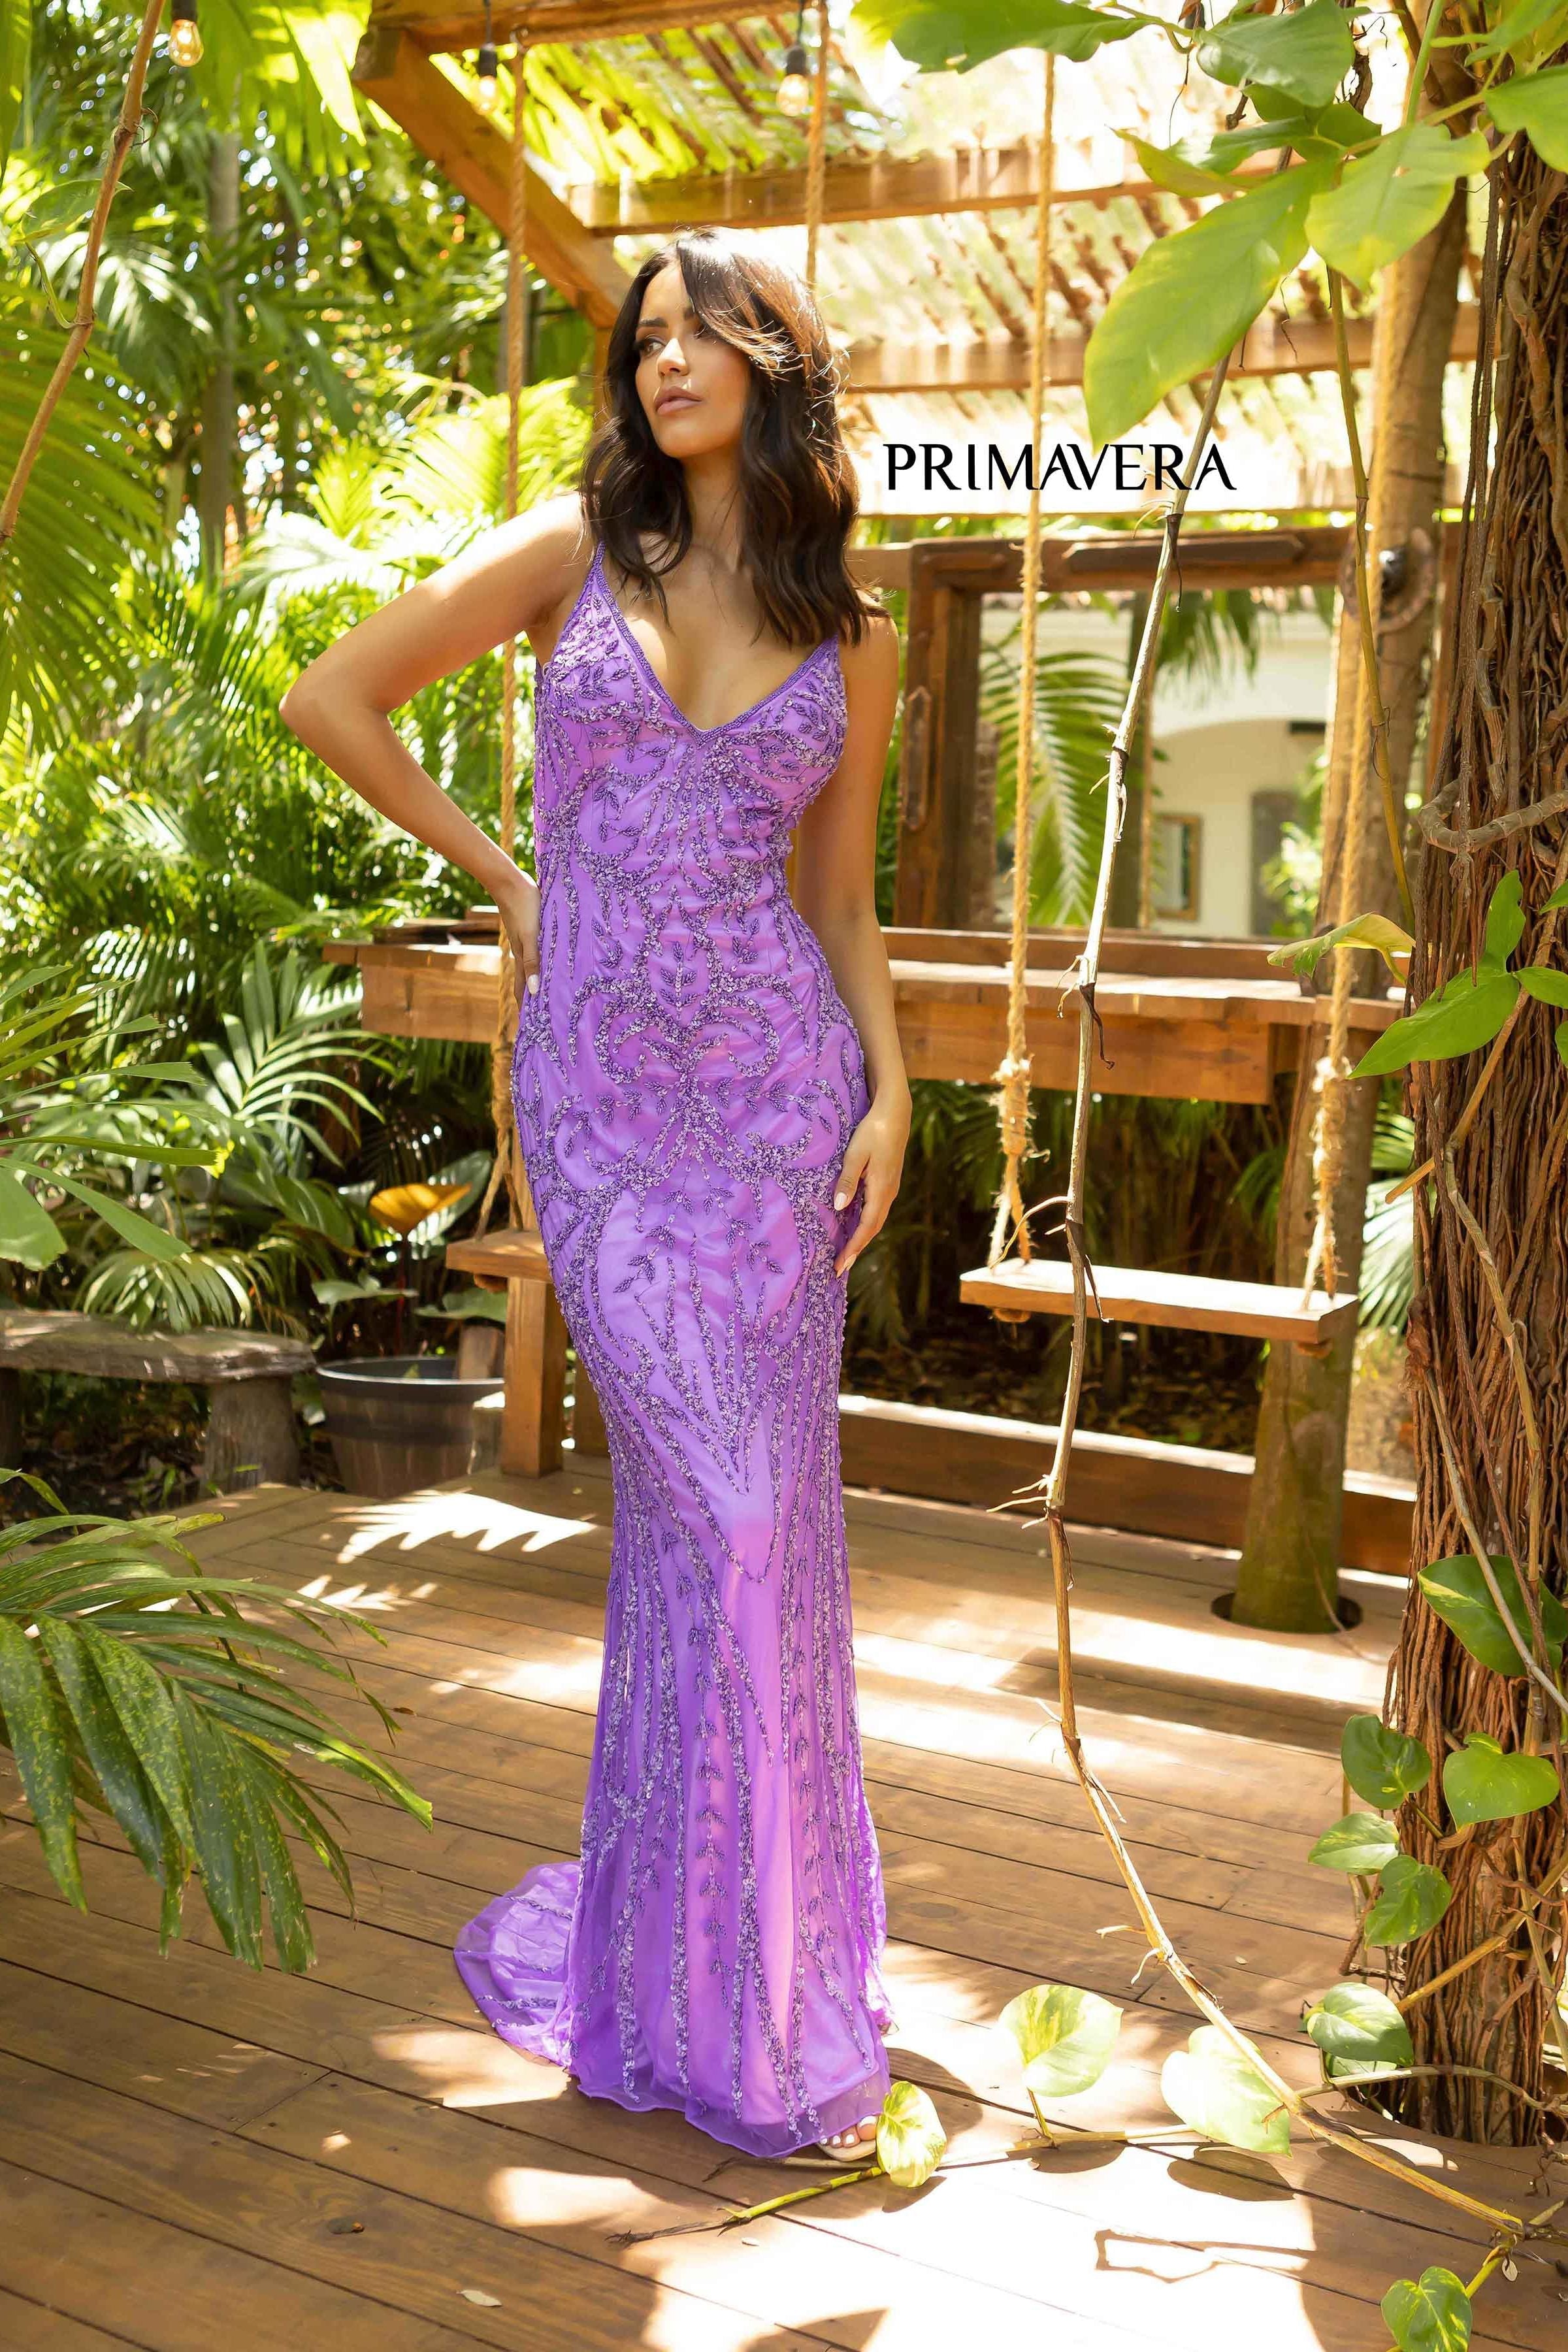 Deep V-Neck Evening Gown 02 By Primavera Couture -3793